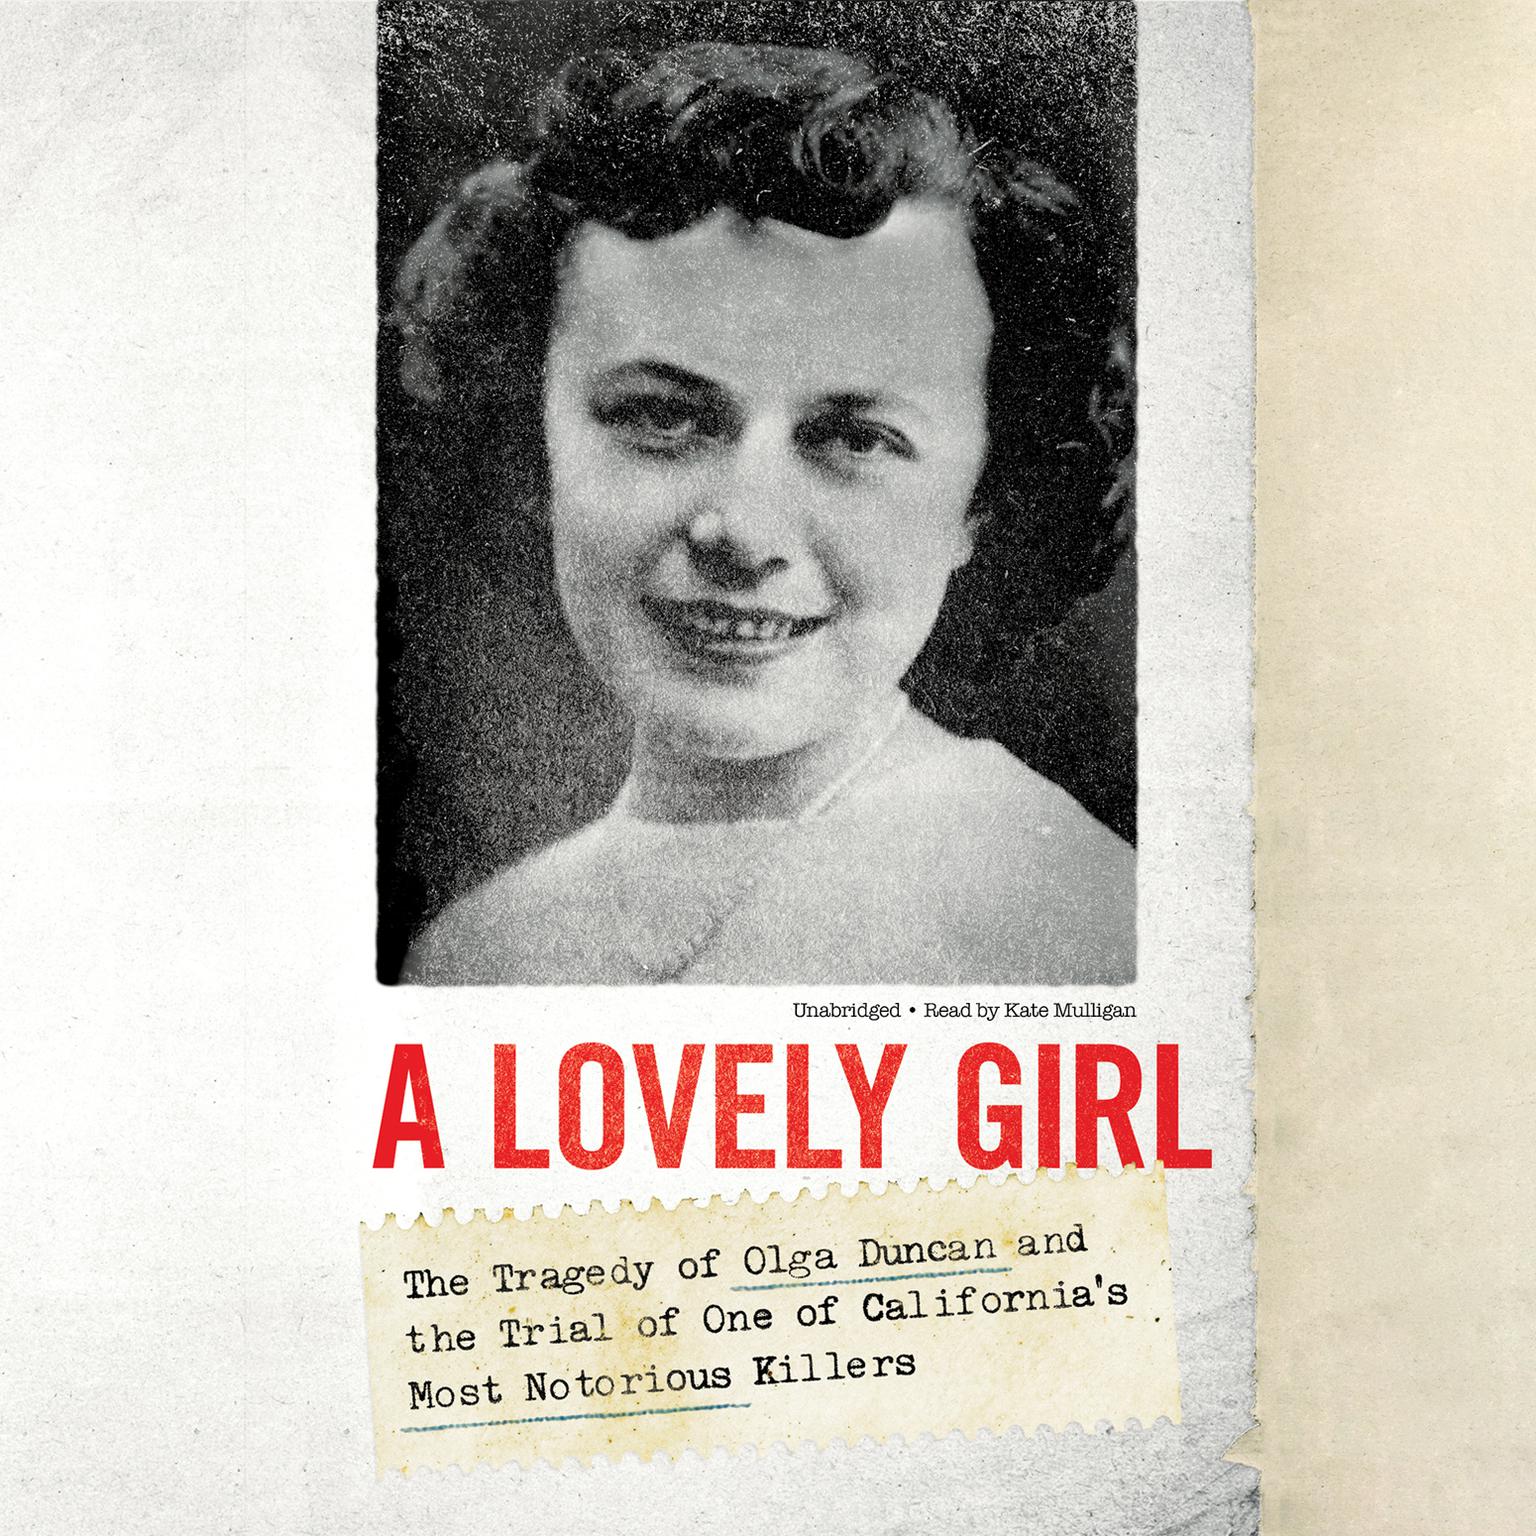 A Lovely Girl: The Tragedy of Olga Duncan and the Trial of One of California’s Most Notorious Killers Audiobook, by Deborah Holt Larkin